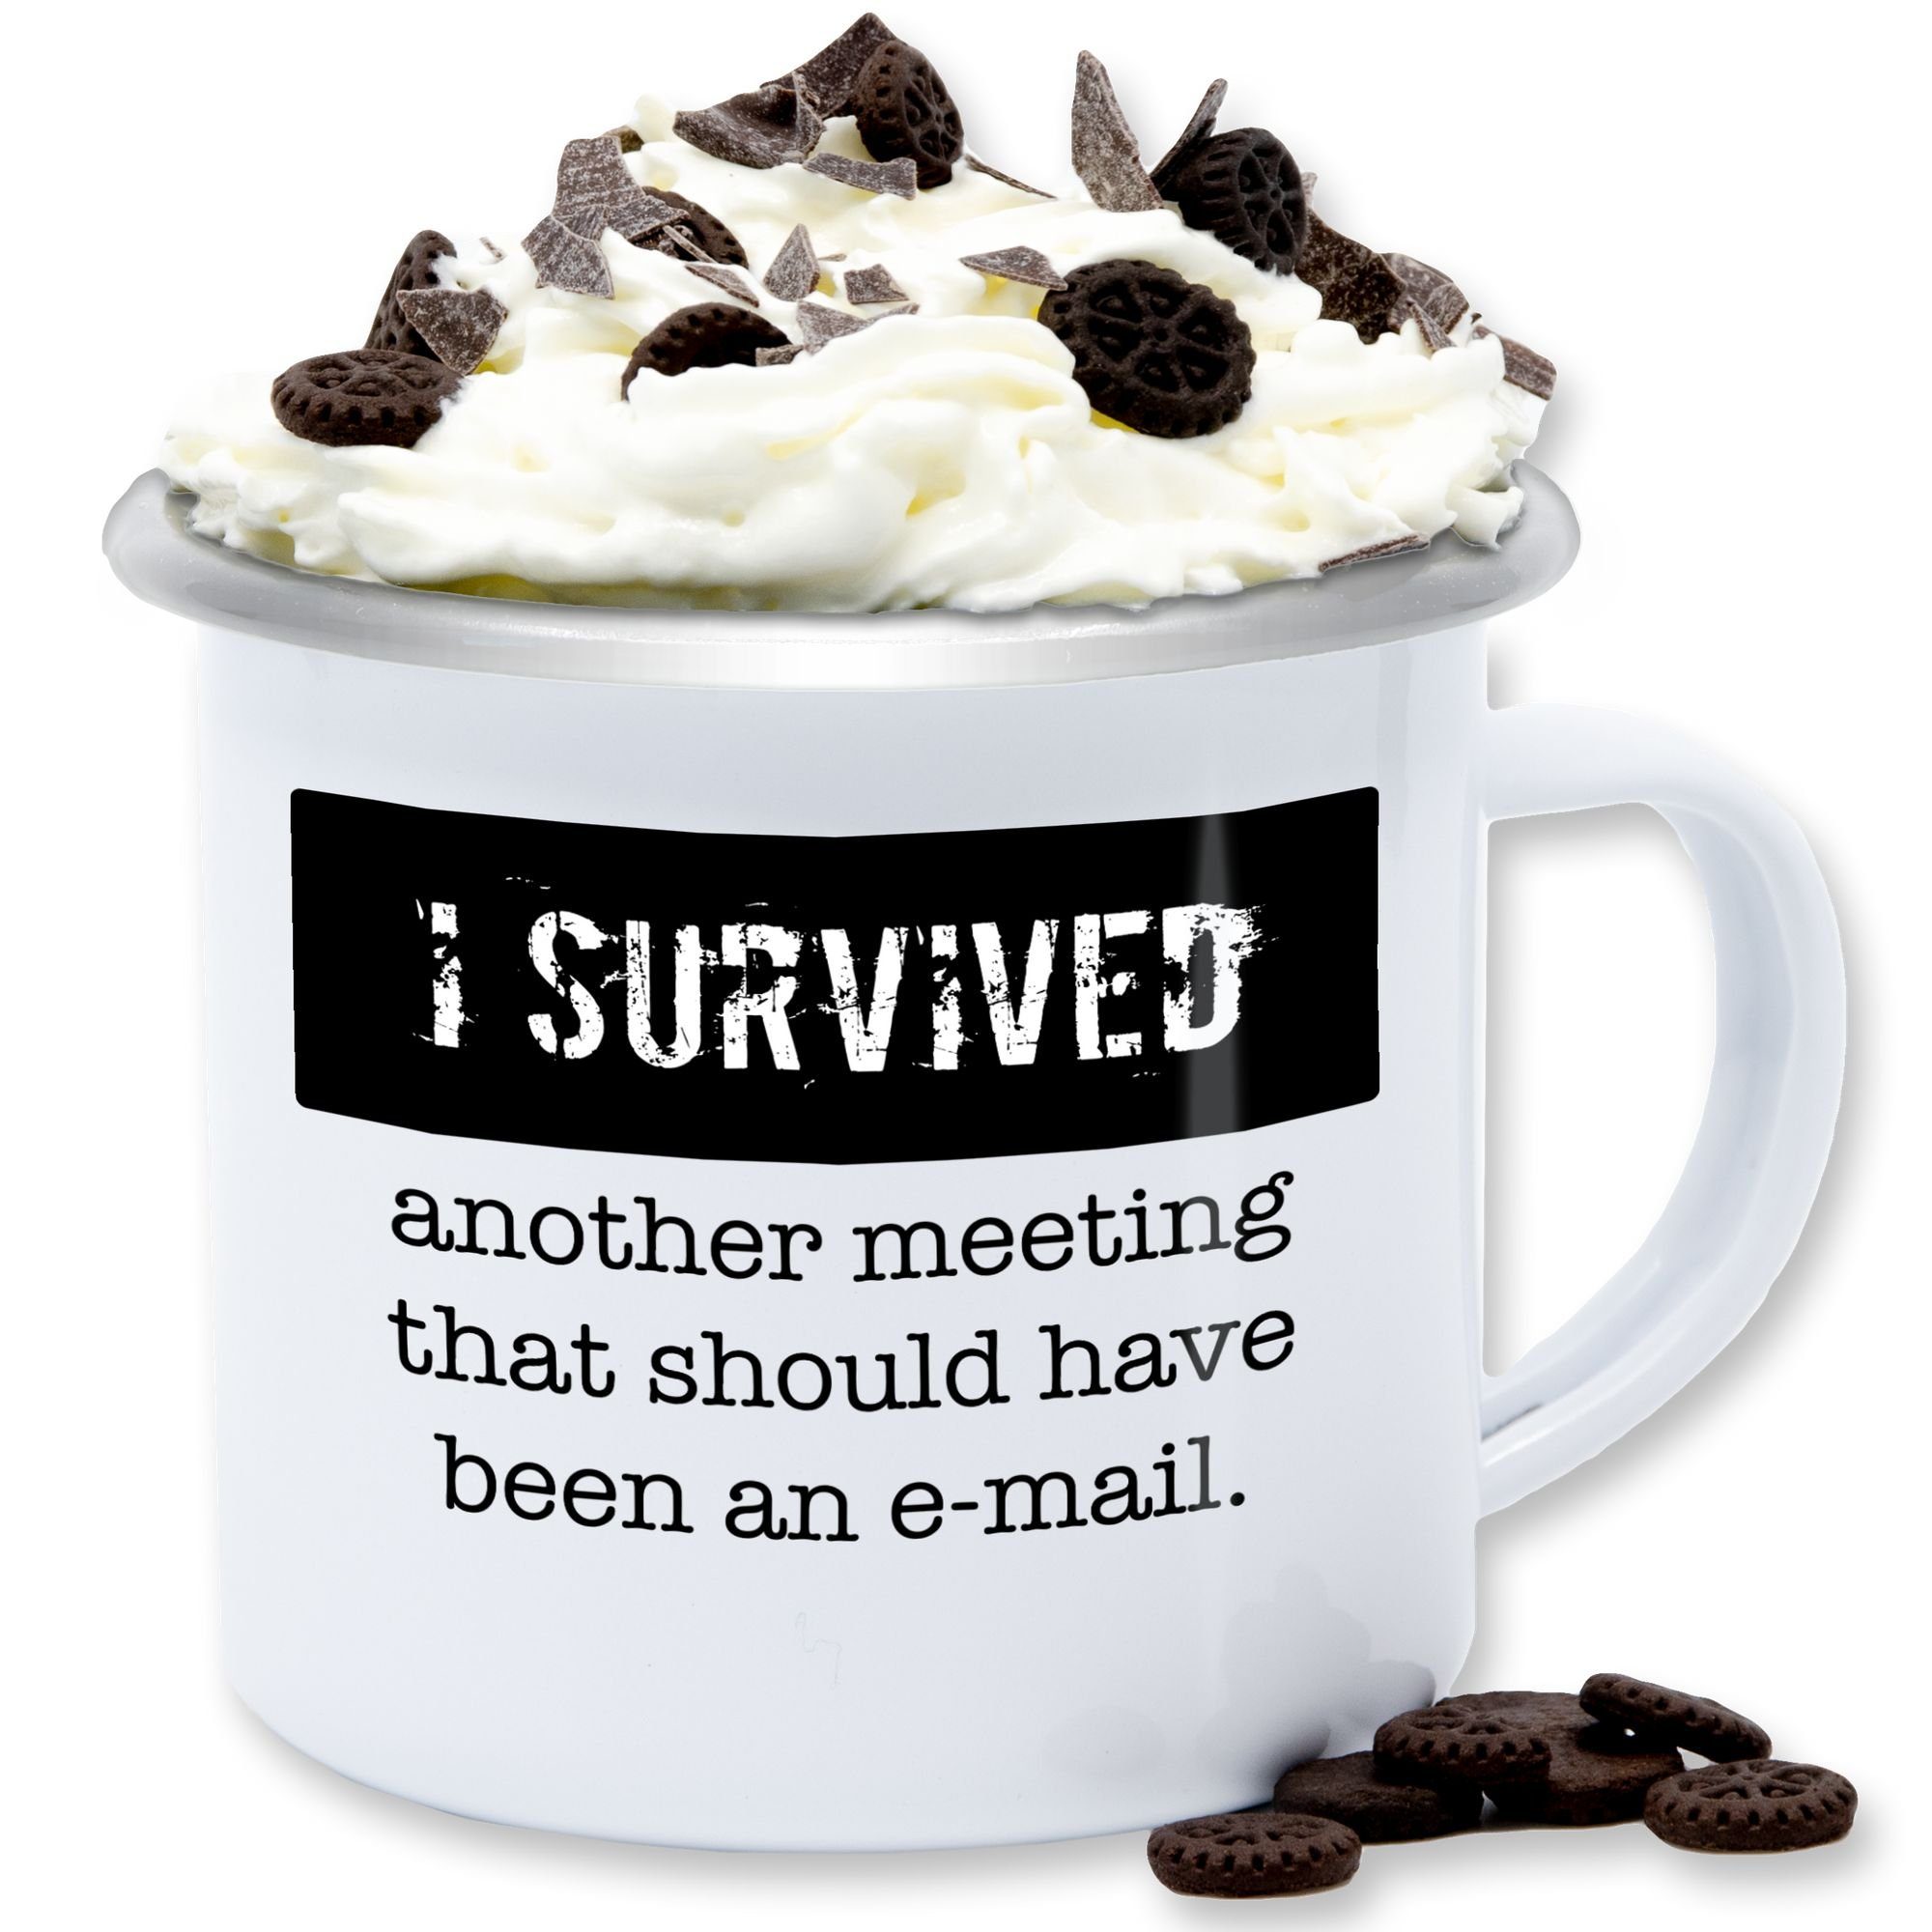 Shirtracer Tasse I survived another meeting, that should have been an e-mail, Stahlblech, Statement Sprüche 2 Weiß Silber